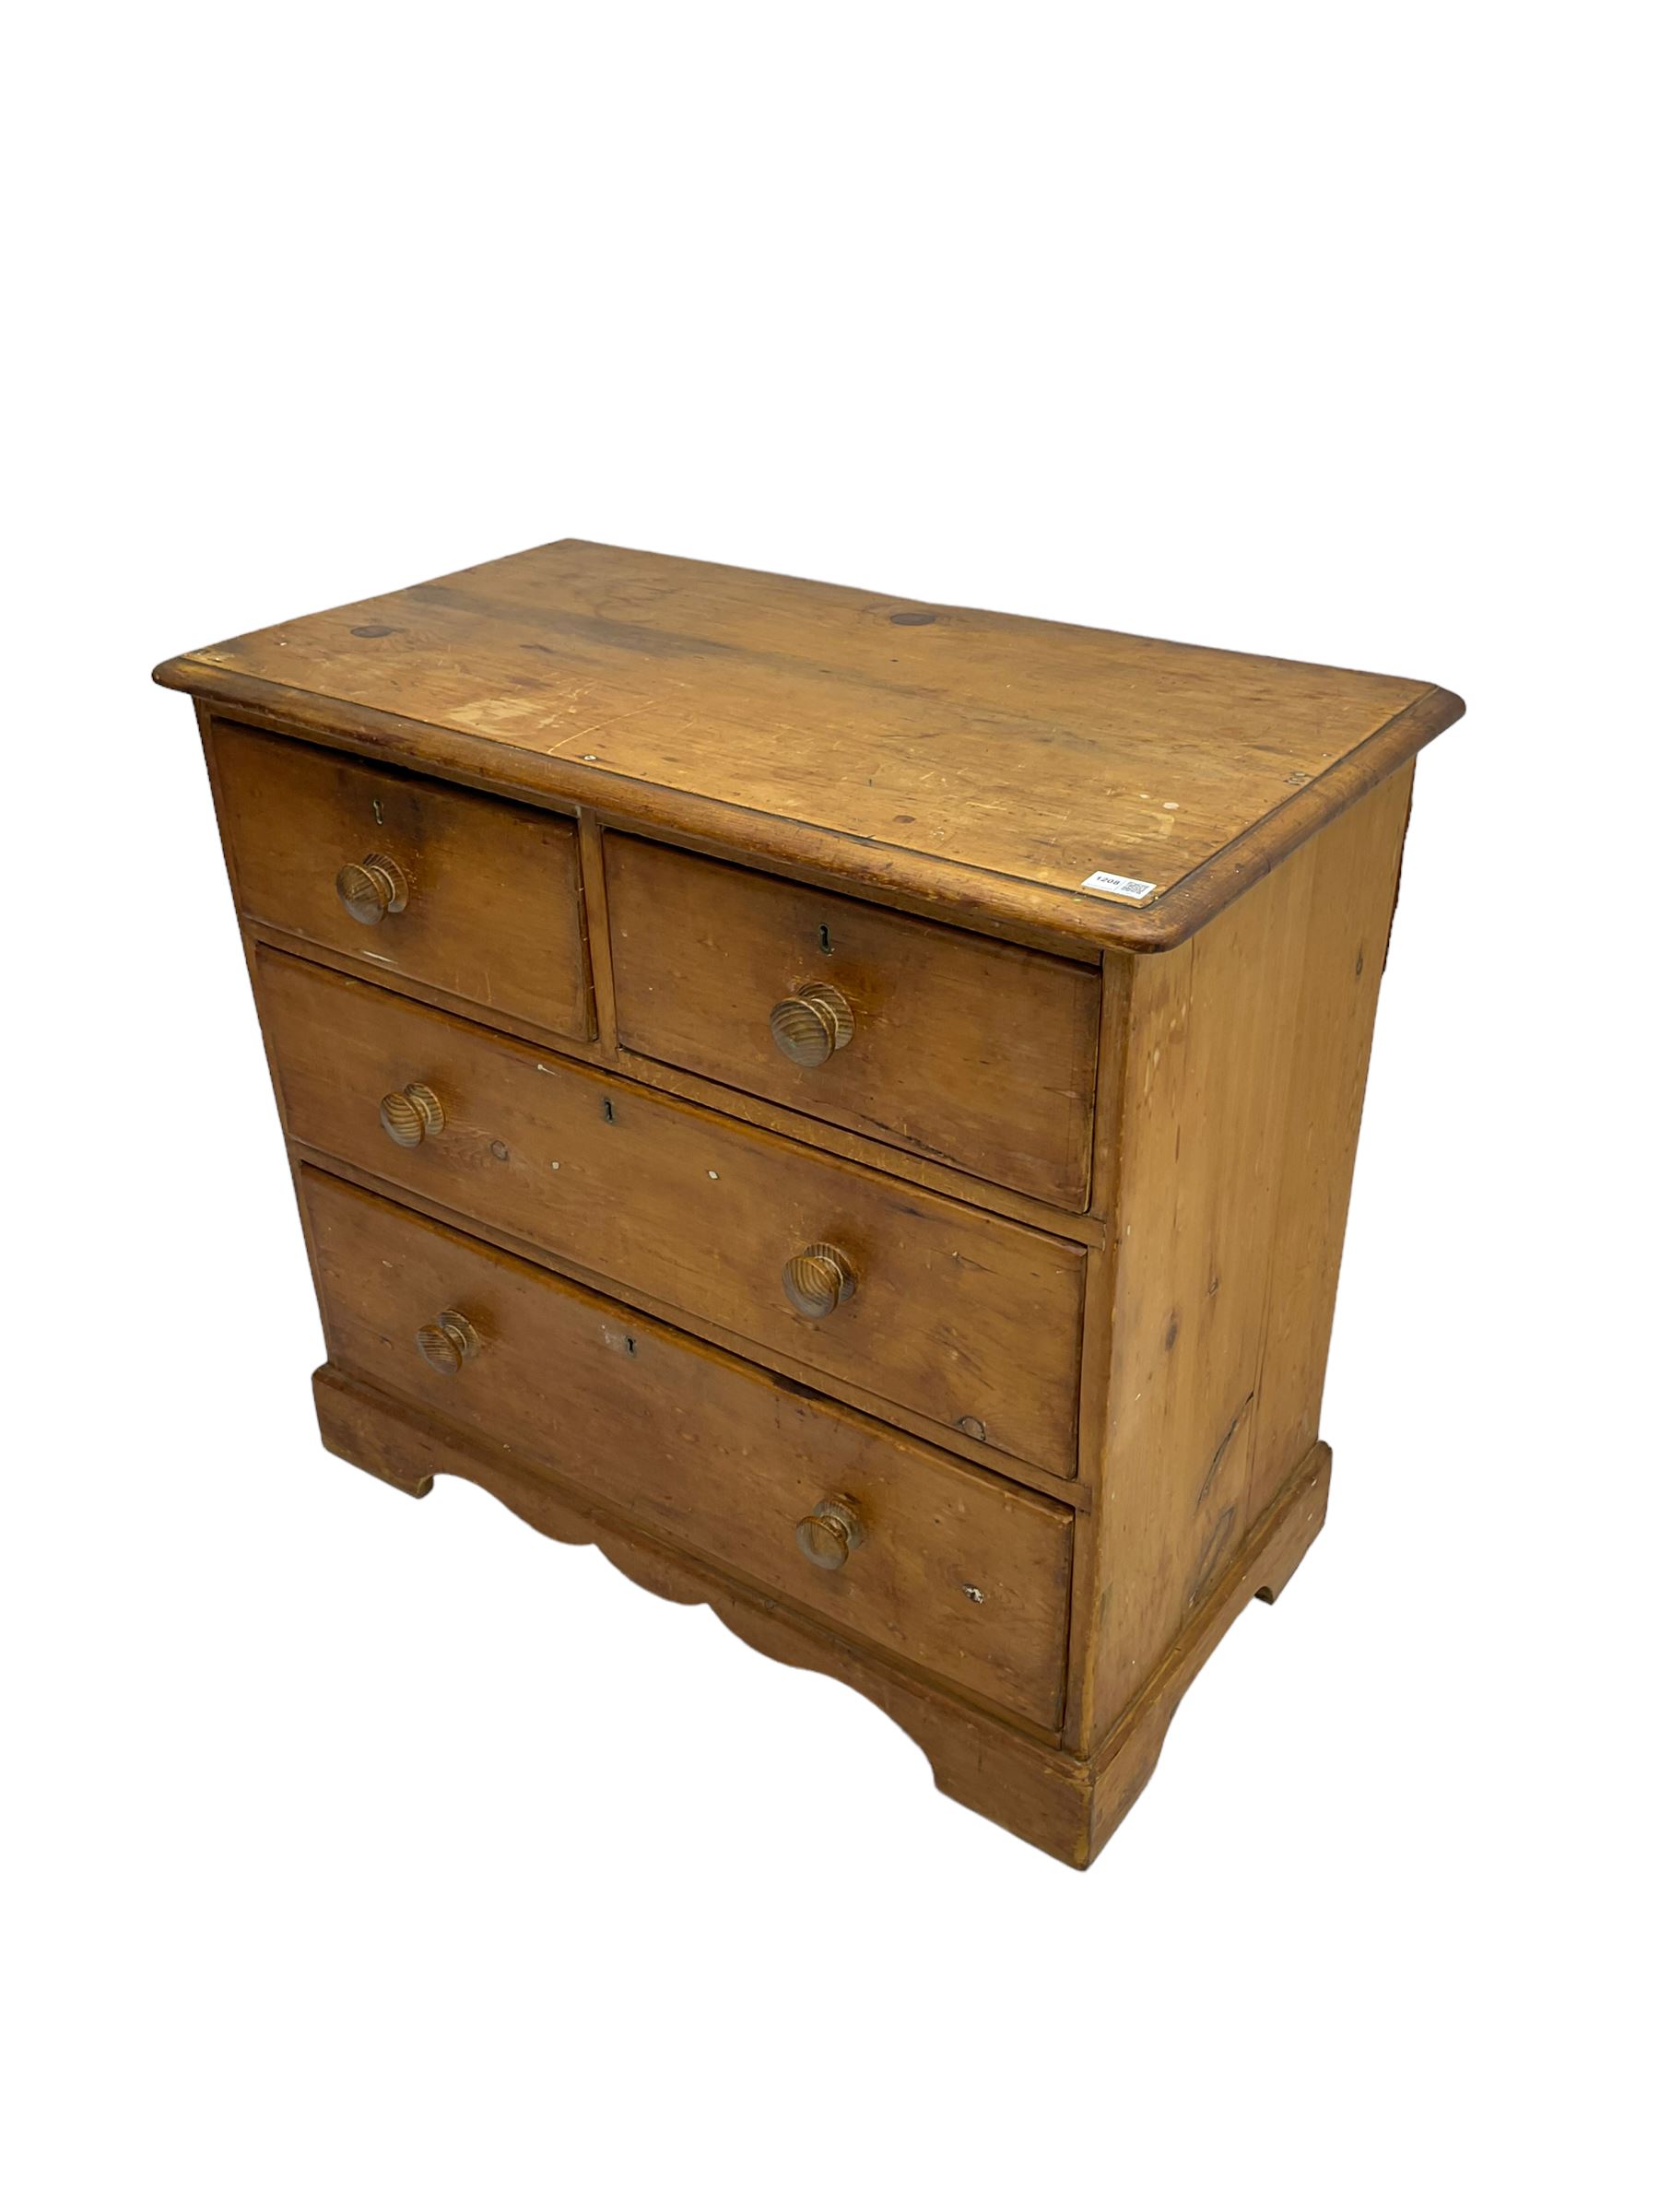 Late 19th century waxed pine chest - Image 7 of 8